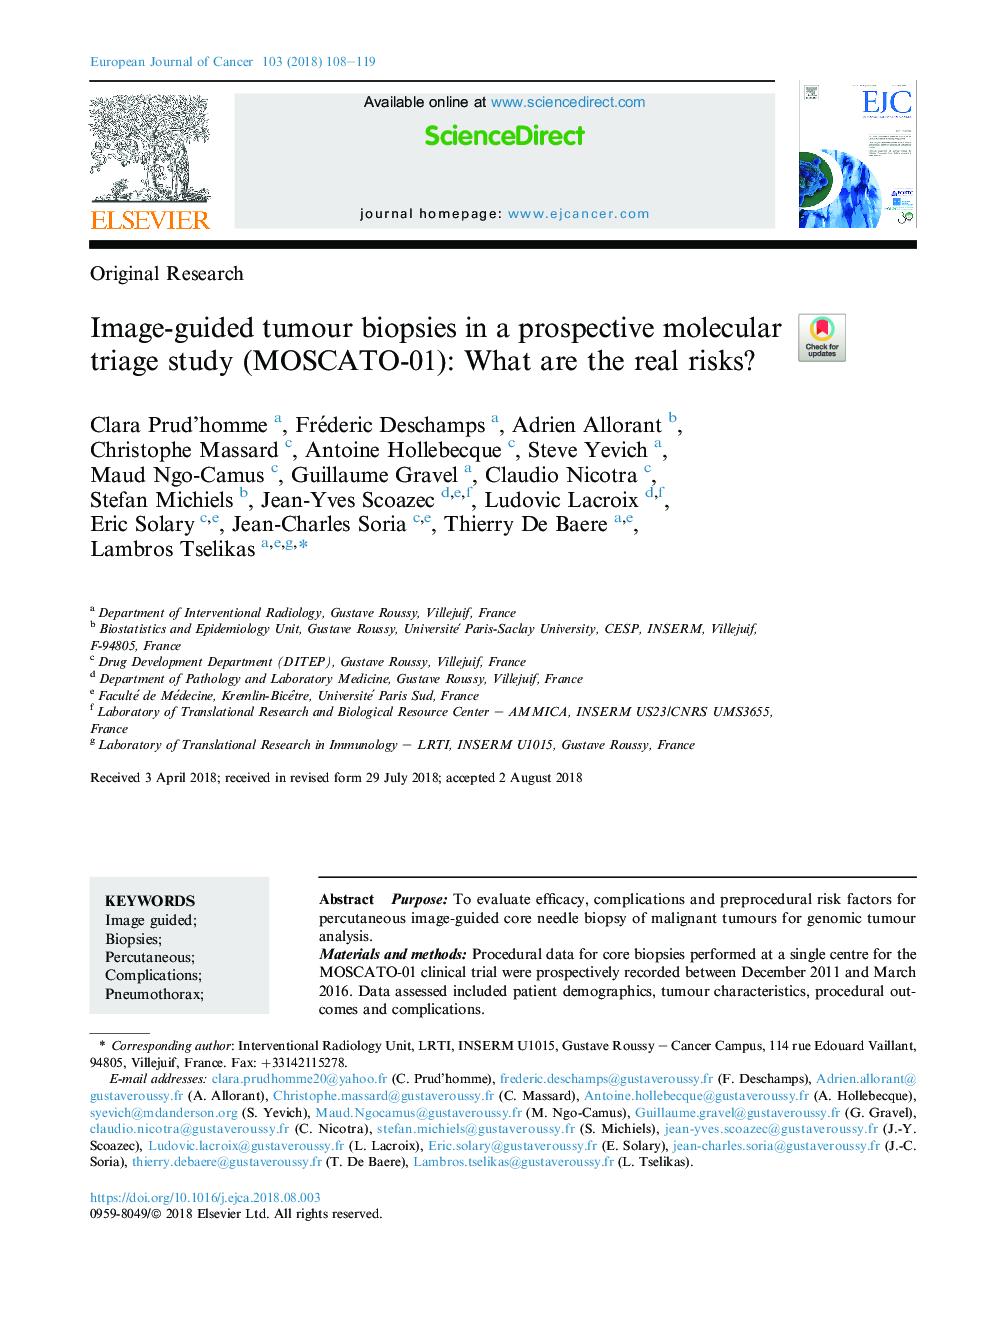 Image-guided tumour biopsies in a prospective molecular triage study (MOSCATO-01): What are the real risks?